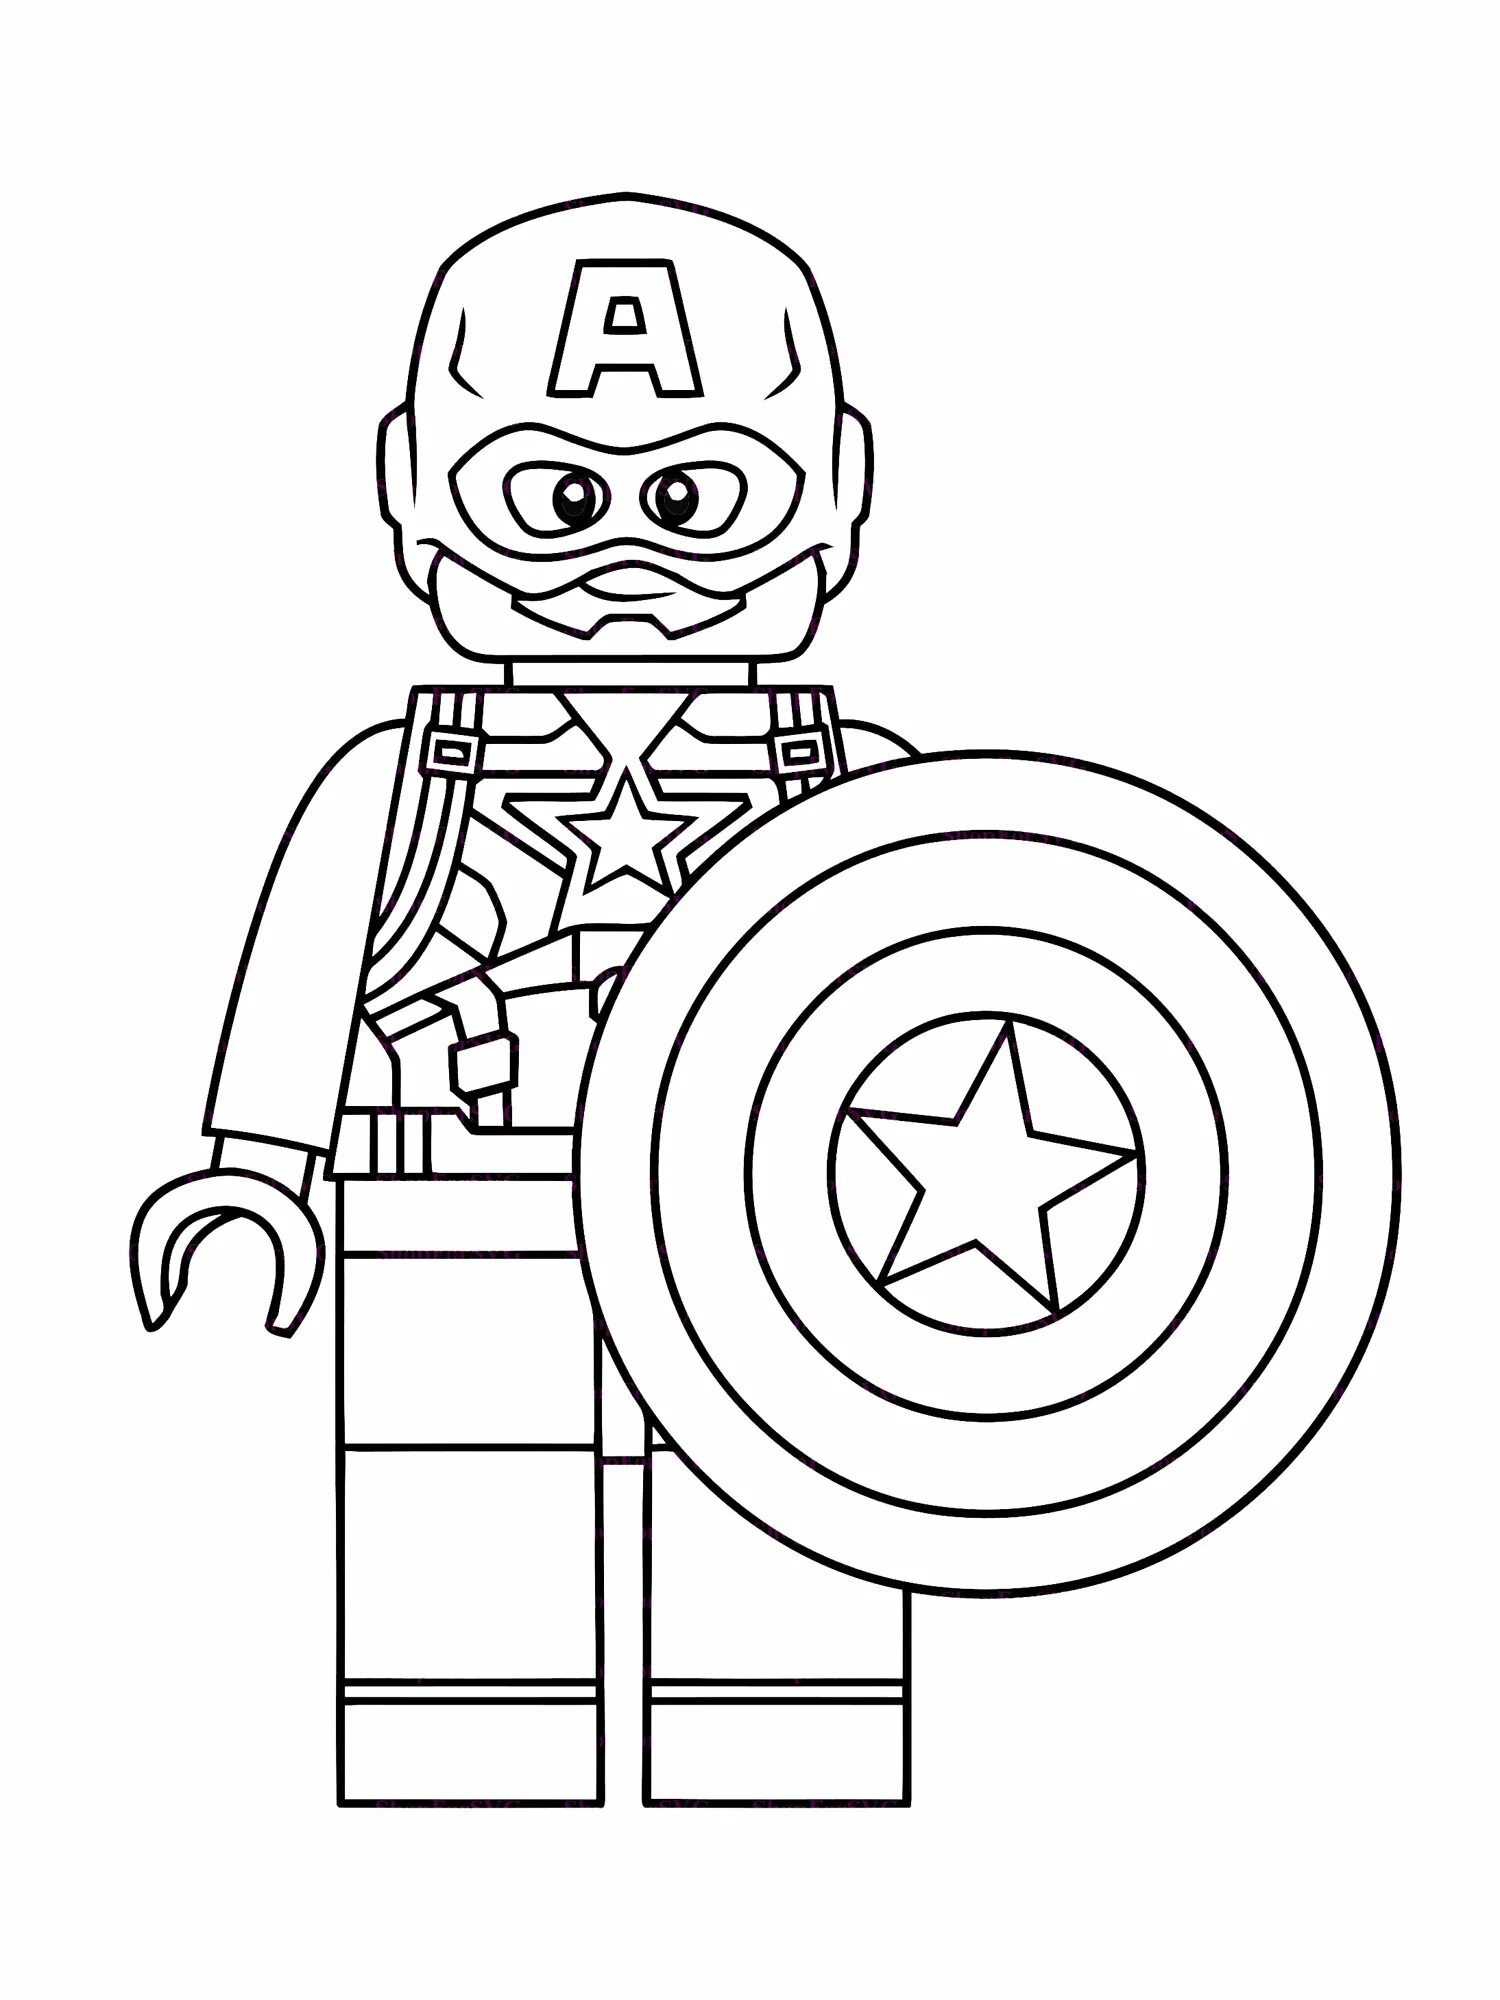 Lego heroes coloring book